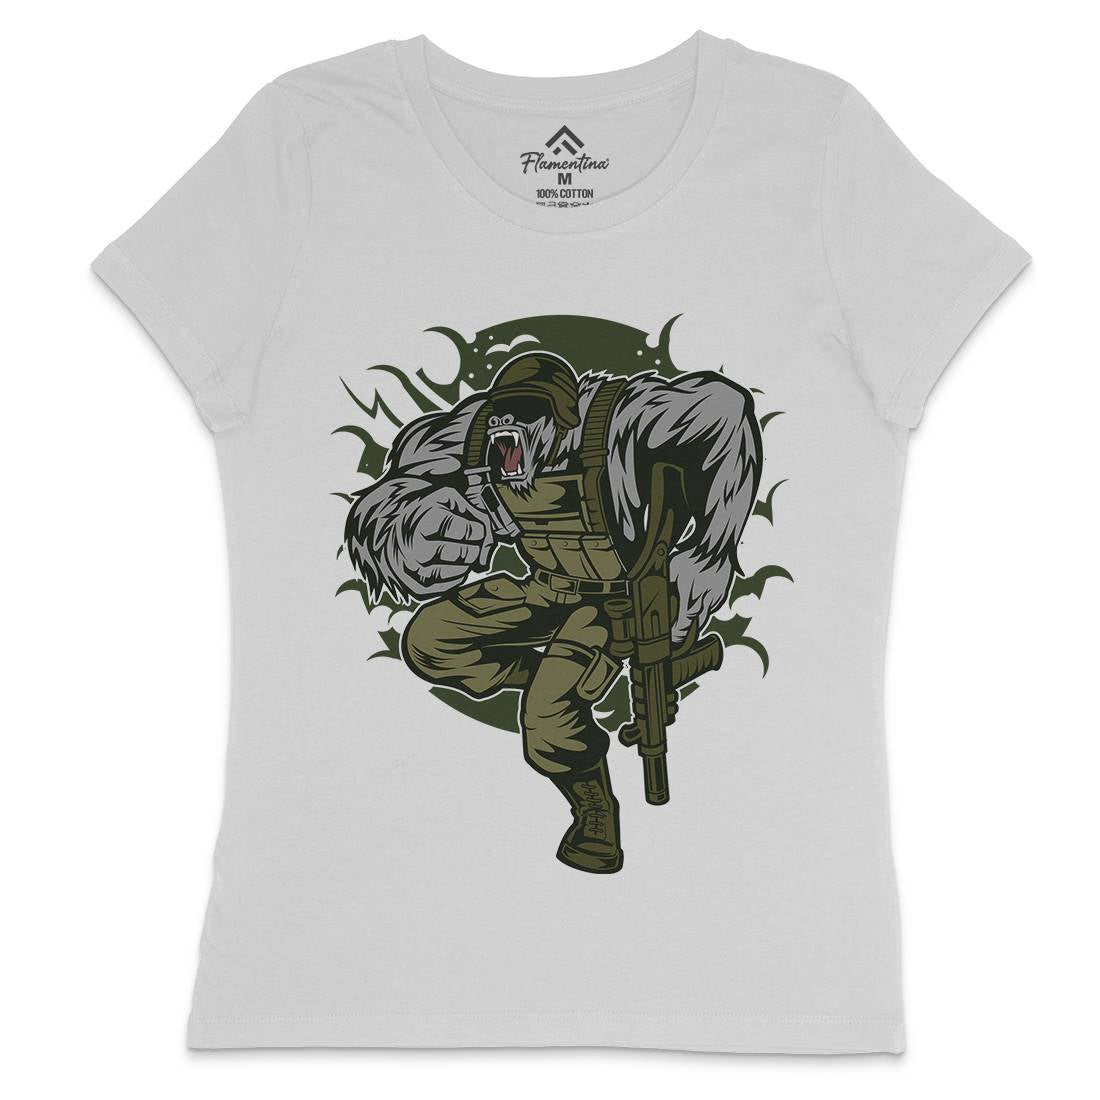 Soldier Ape Womens Crew Neck T-Shirt Army C448